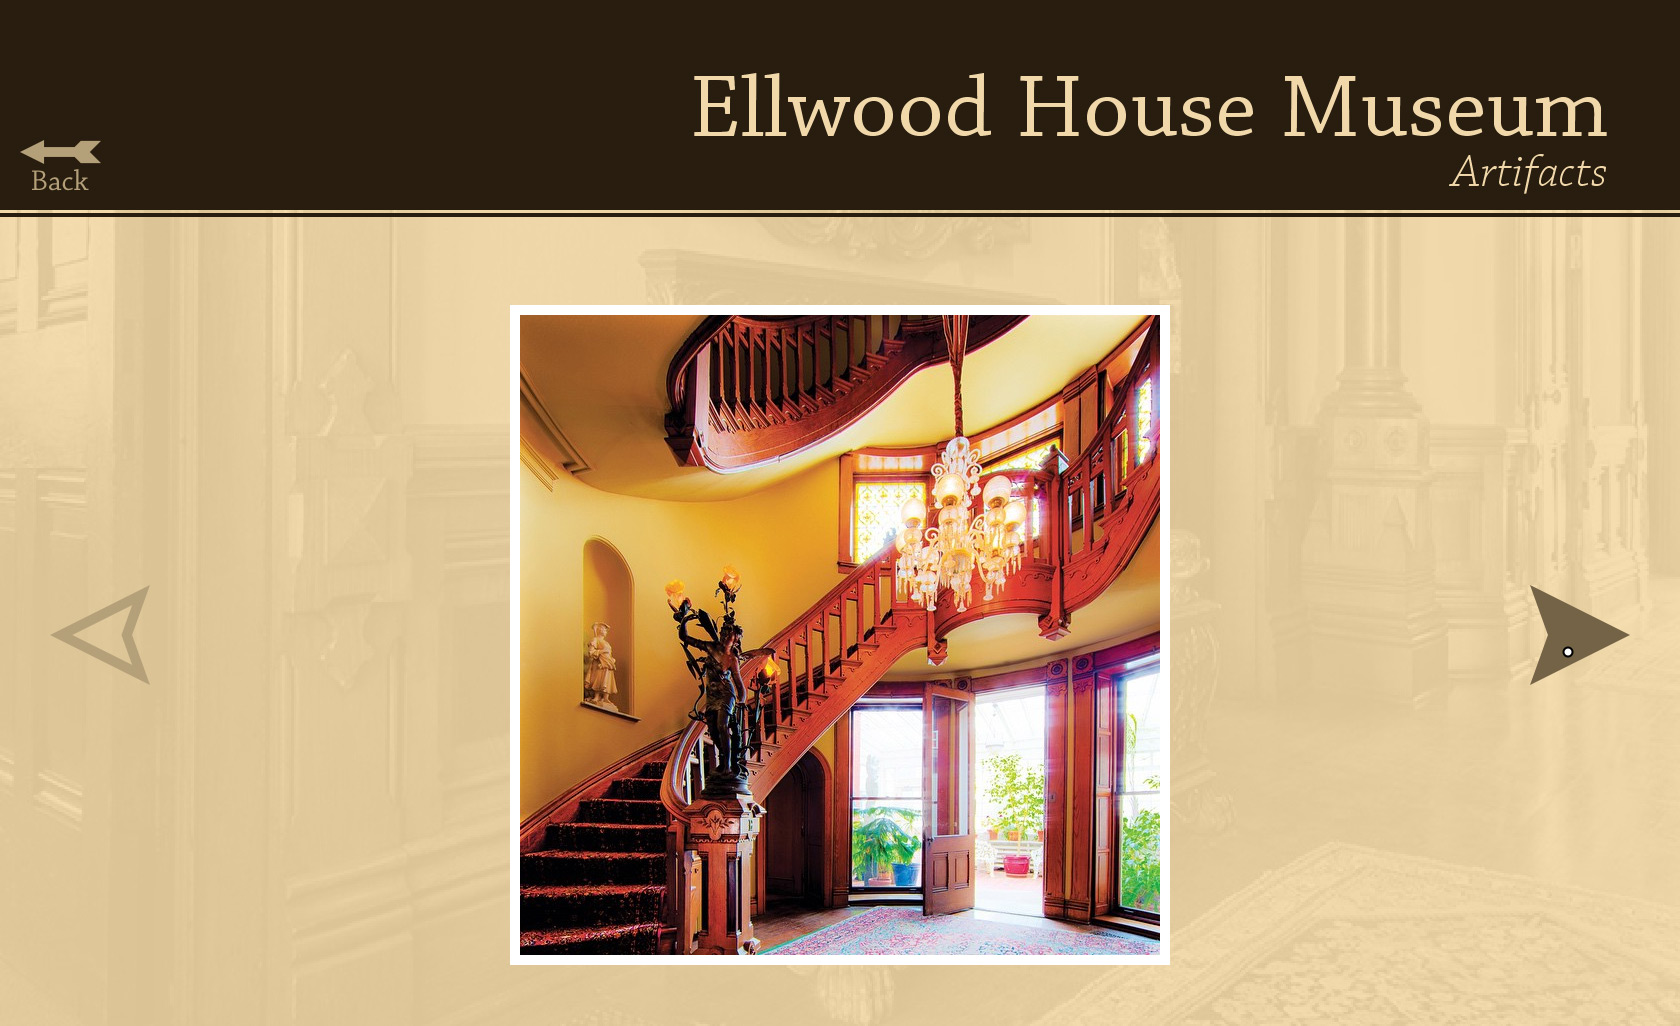 Ellwood House Museum: Artifacts